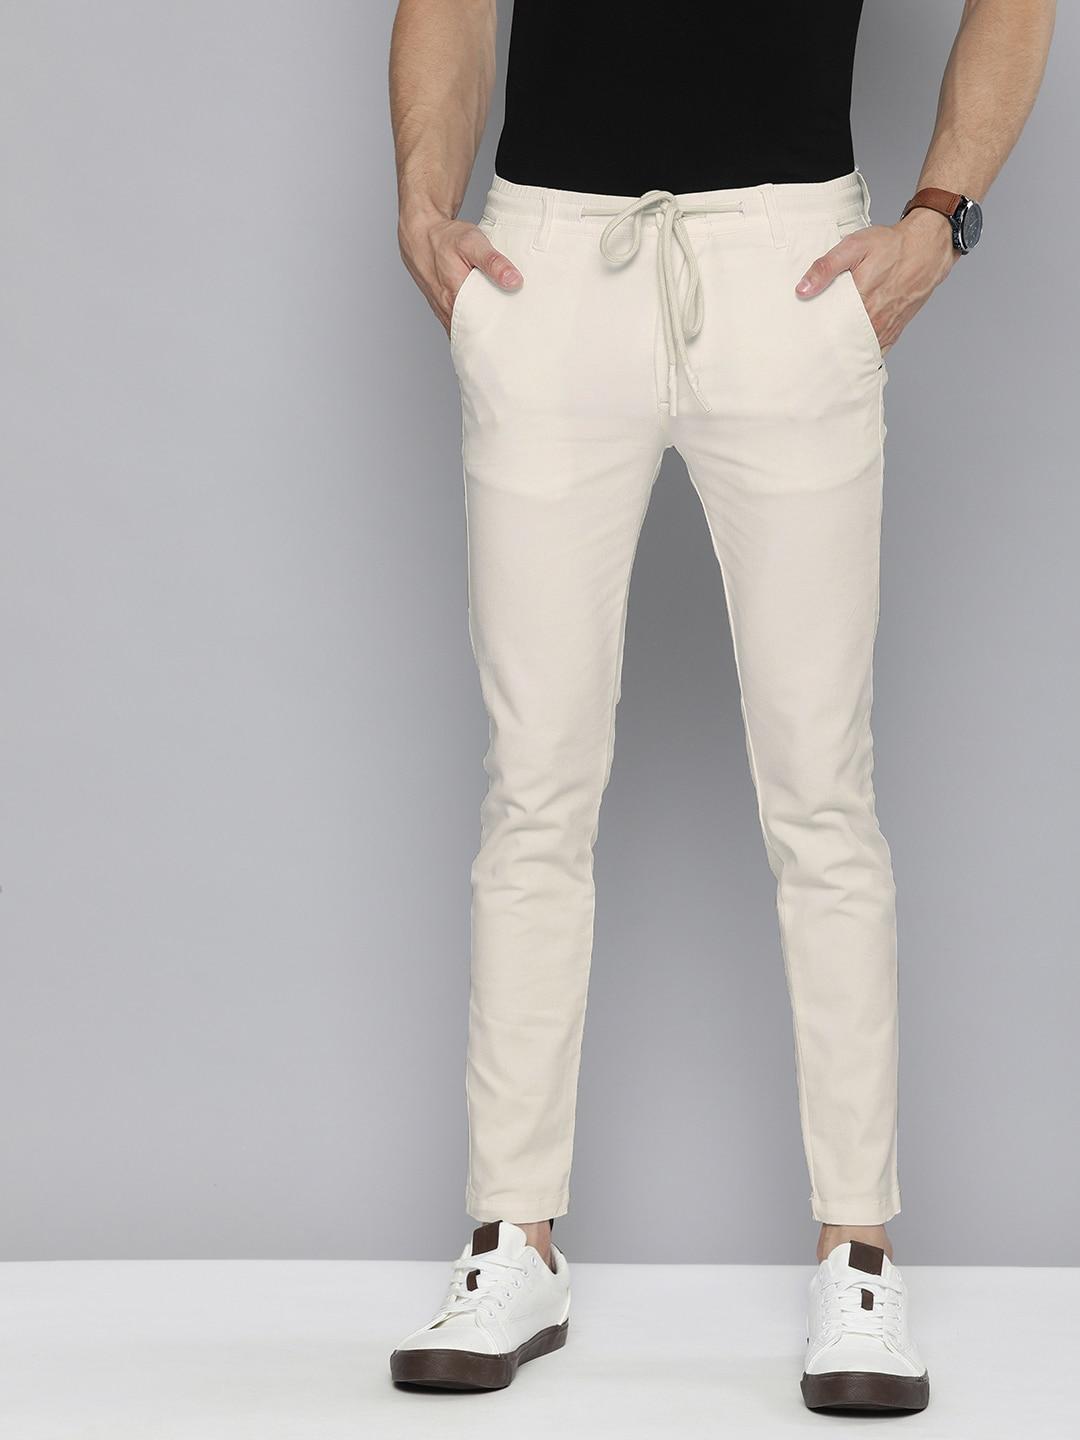 The Indian Garage Co Men White Slim Fit Chinos Trousers